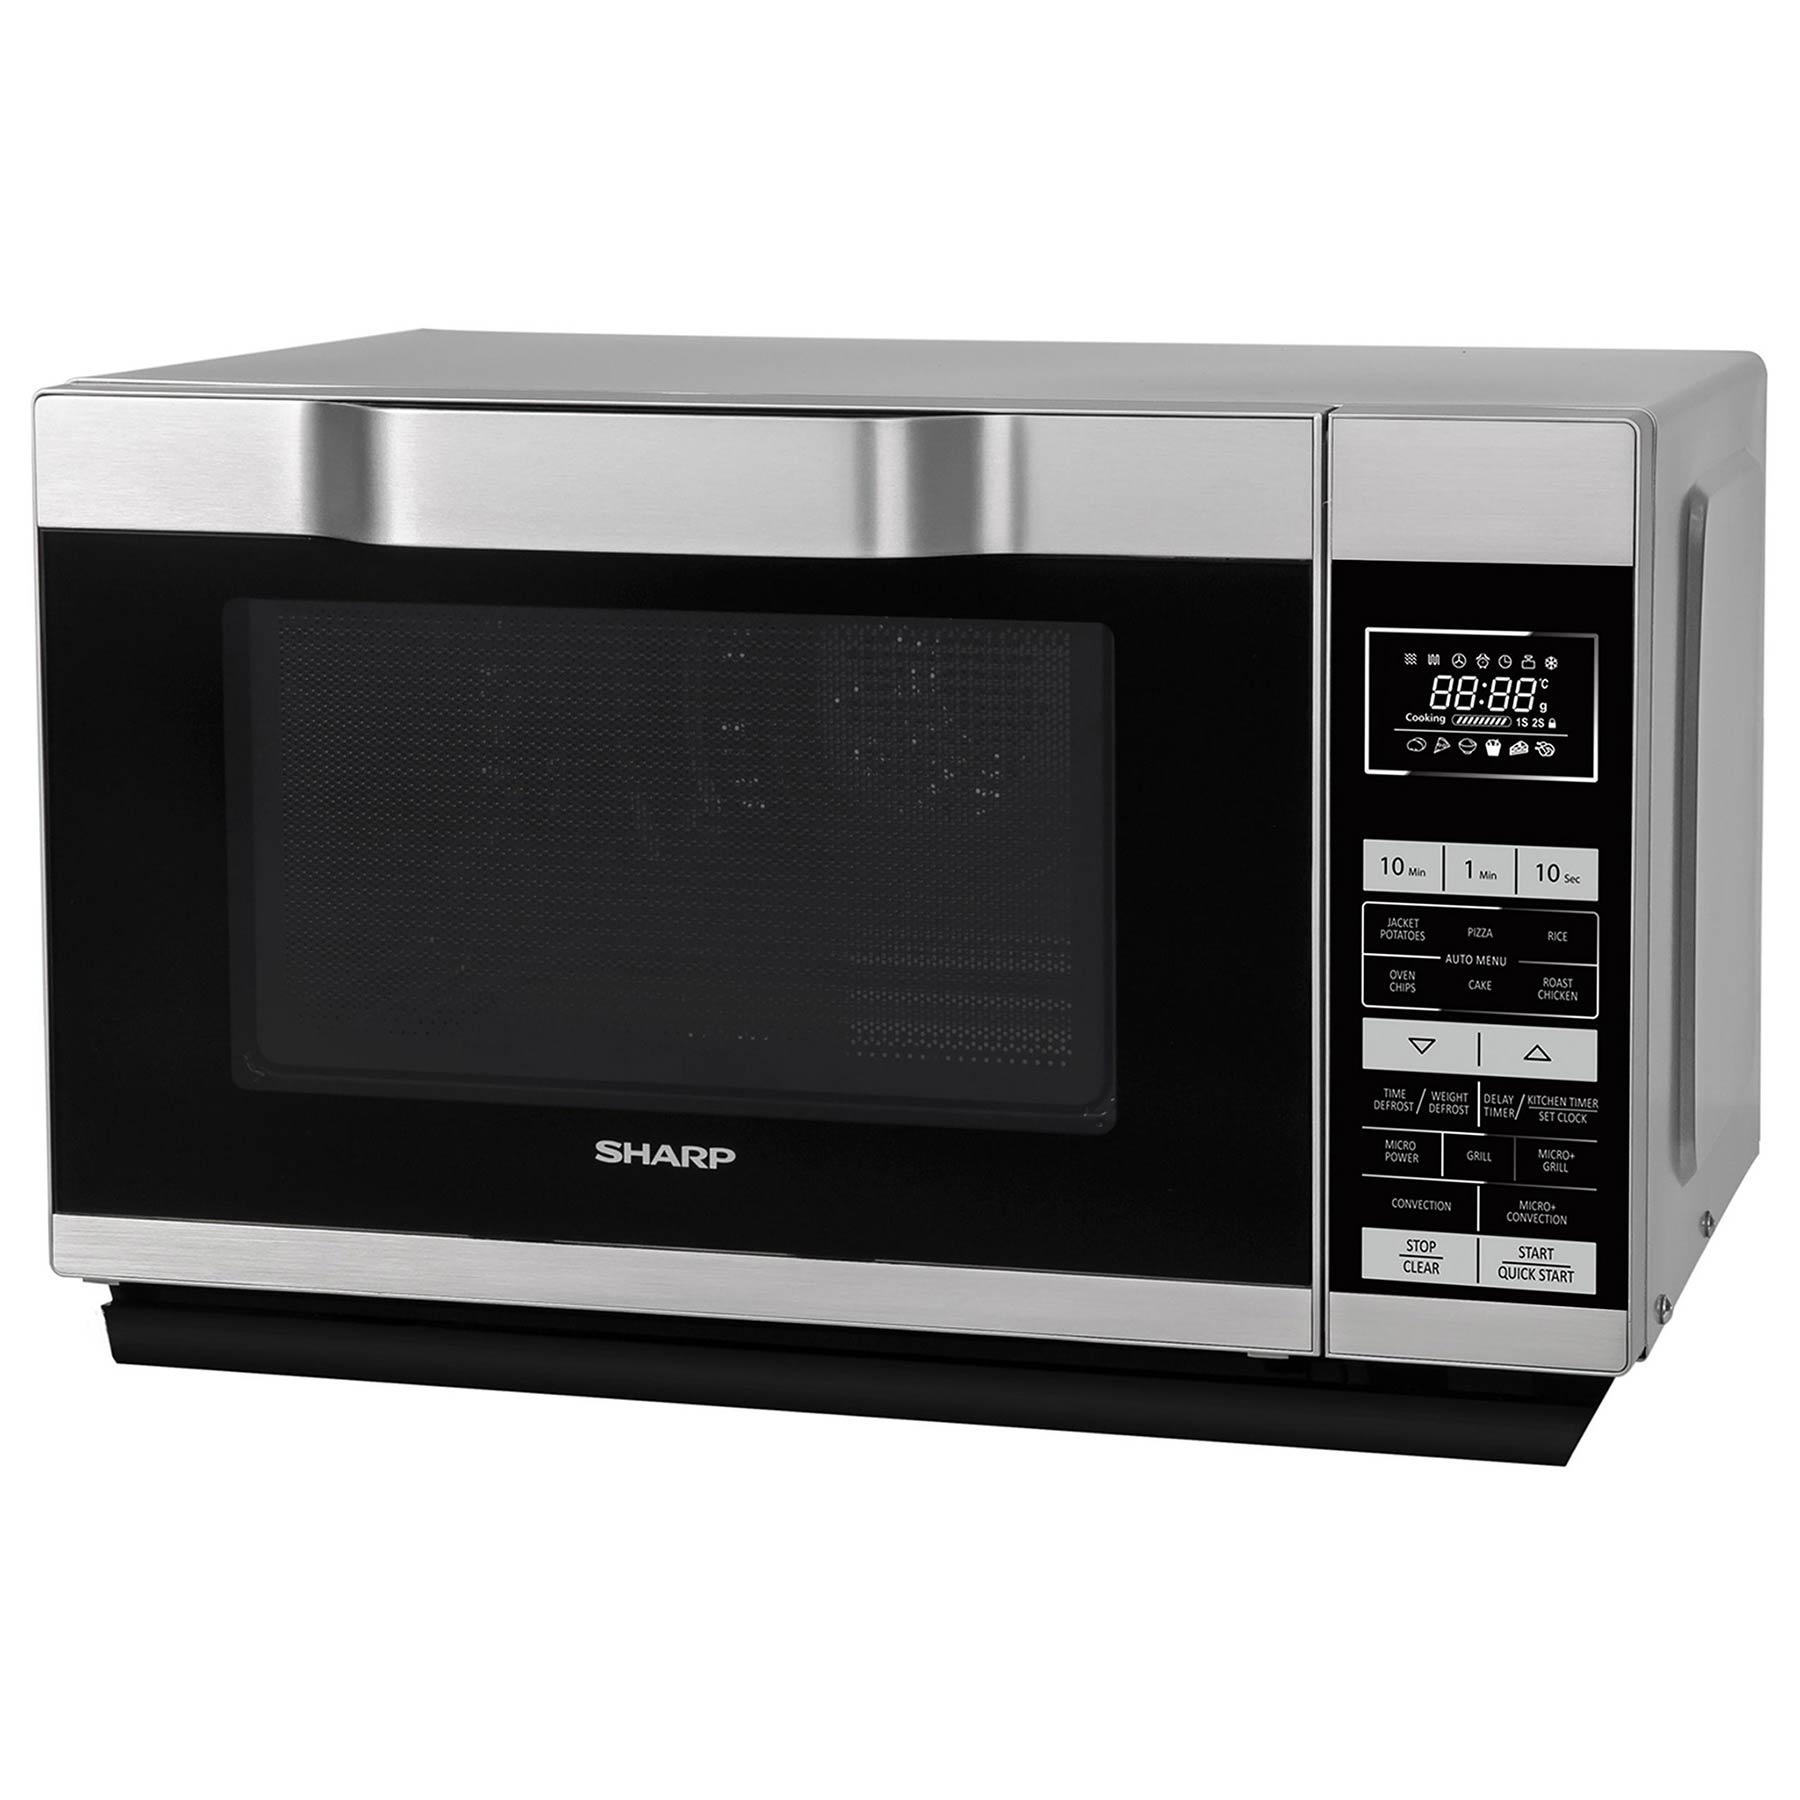 Sharp R861SLM Combination Microwave Oven in Black Silver 25L 900W